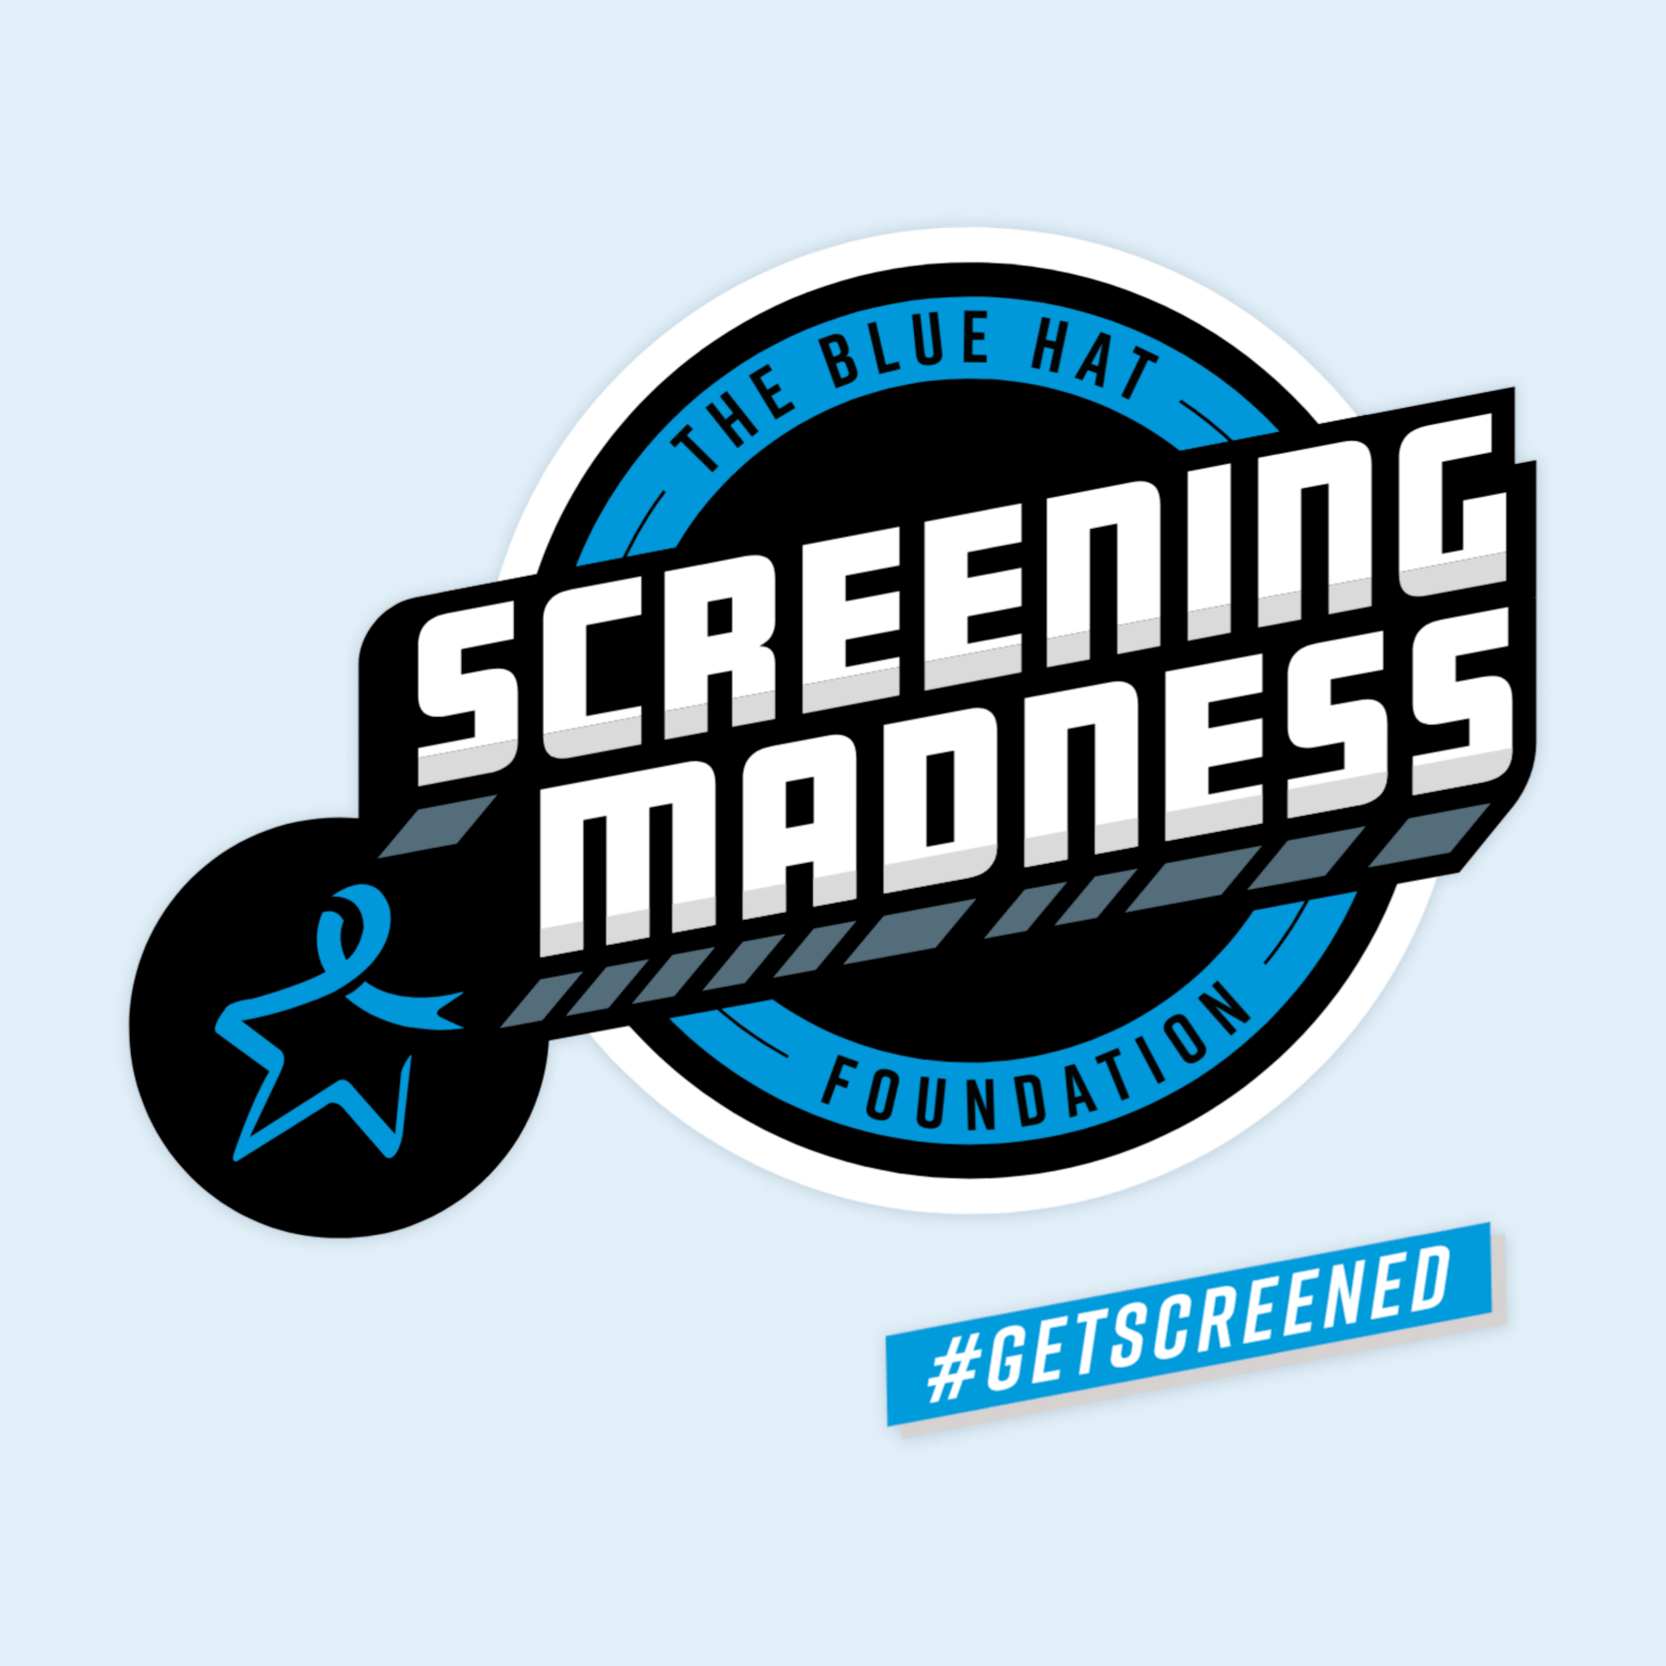 The Blue Hat Foundation Screening Madness logo with the social media hashtag #GETSCREENED.